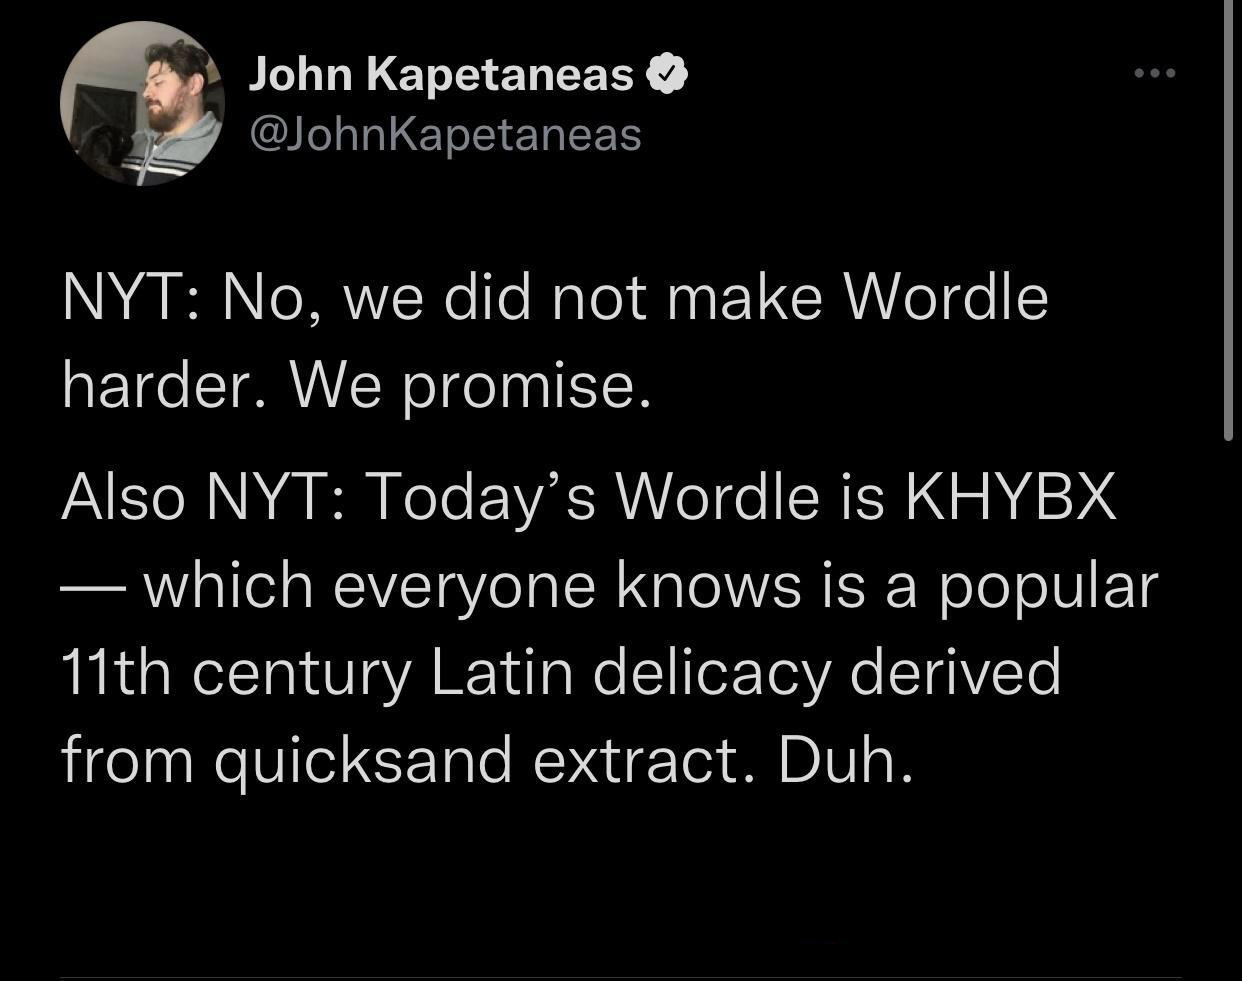 Funny Tweets - No, we did not make Wordle harder. We promise. Also Nyt Today's Wordle is Khybx which everyone knows is a popular 11th century Latin delicacy derived from quicksand extract. Duh.